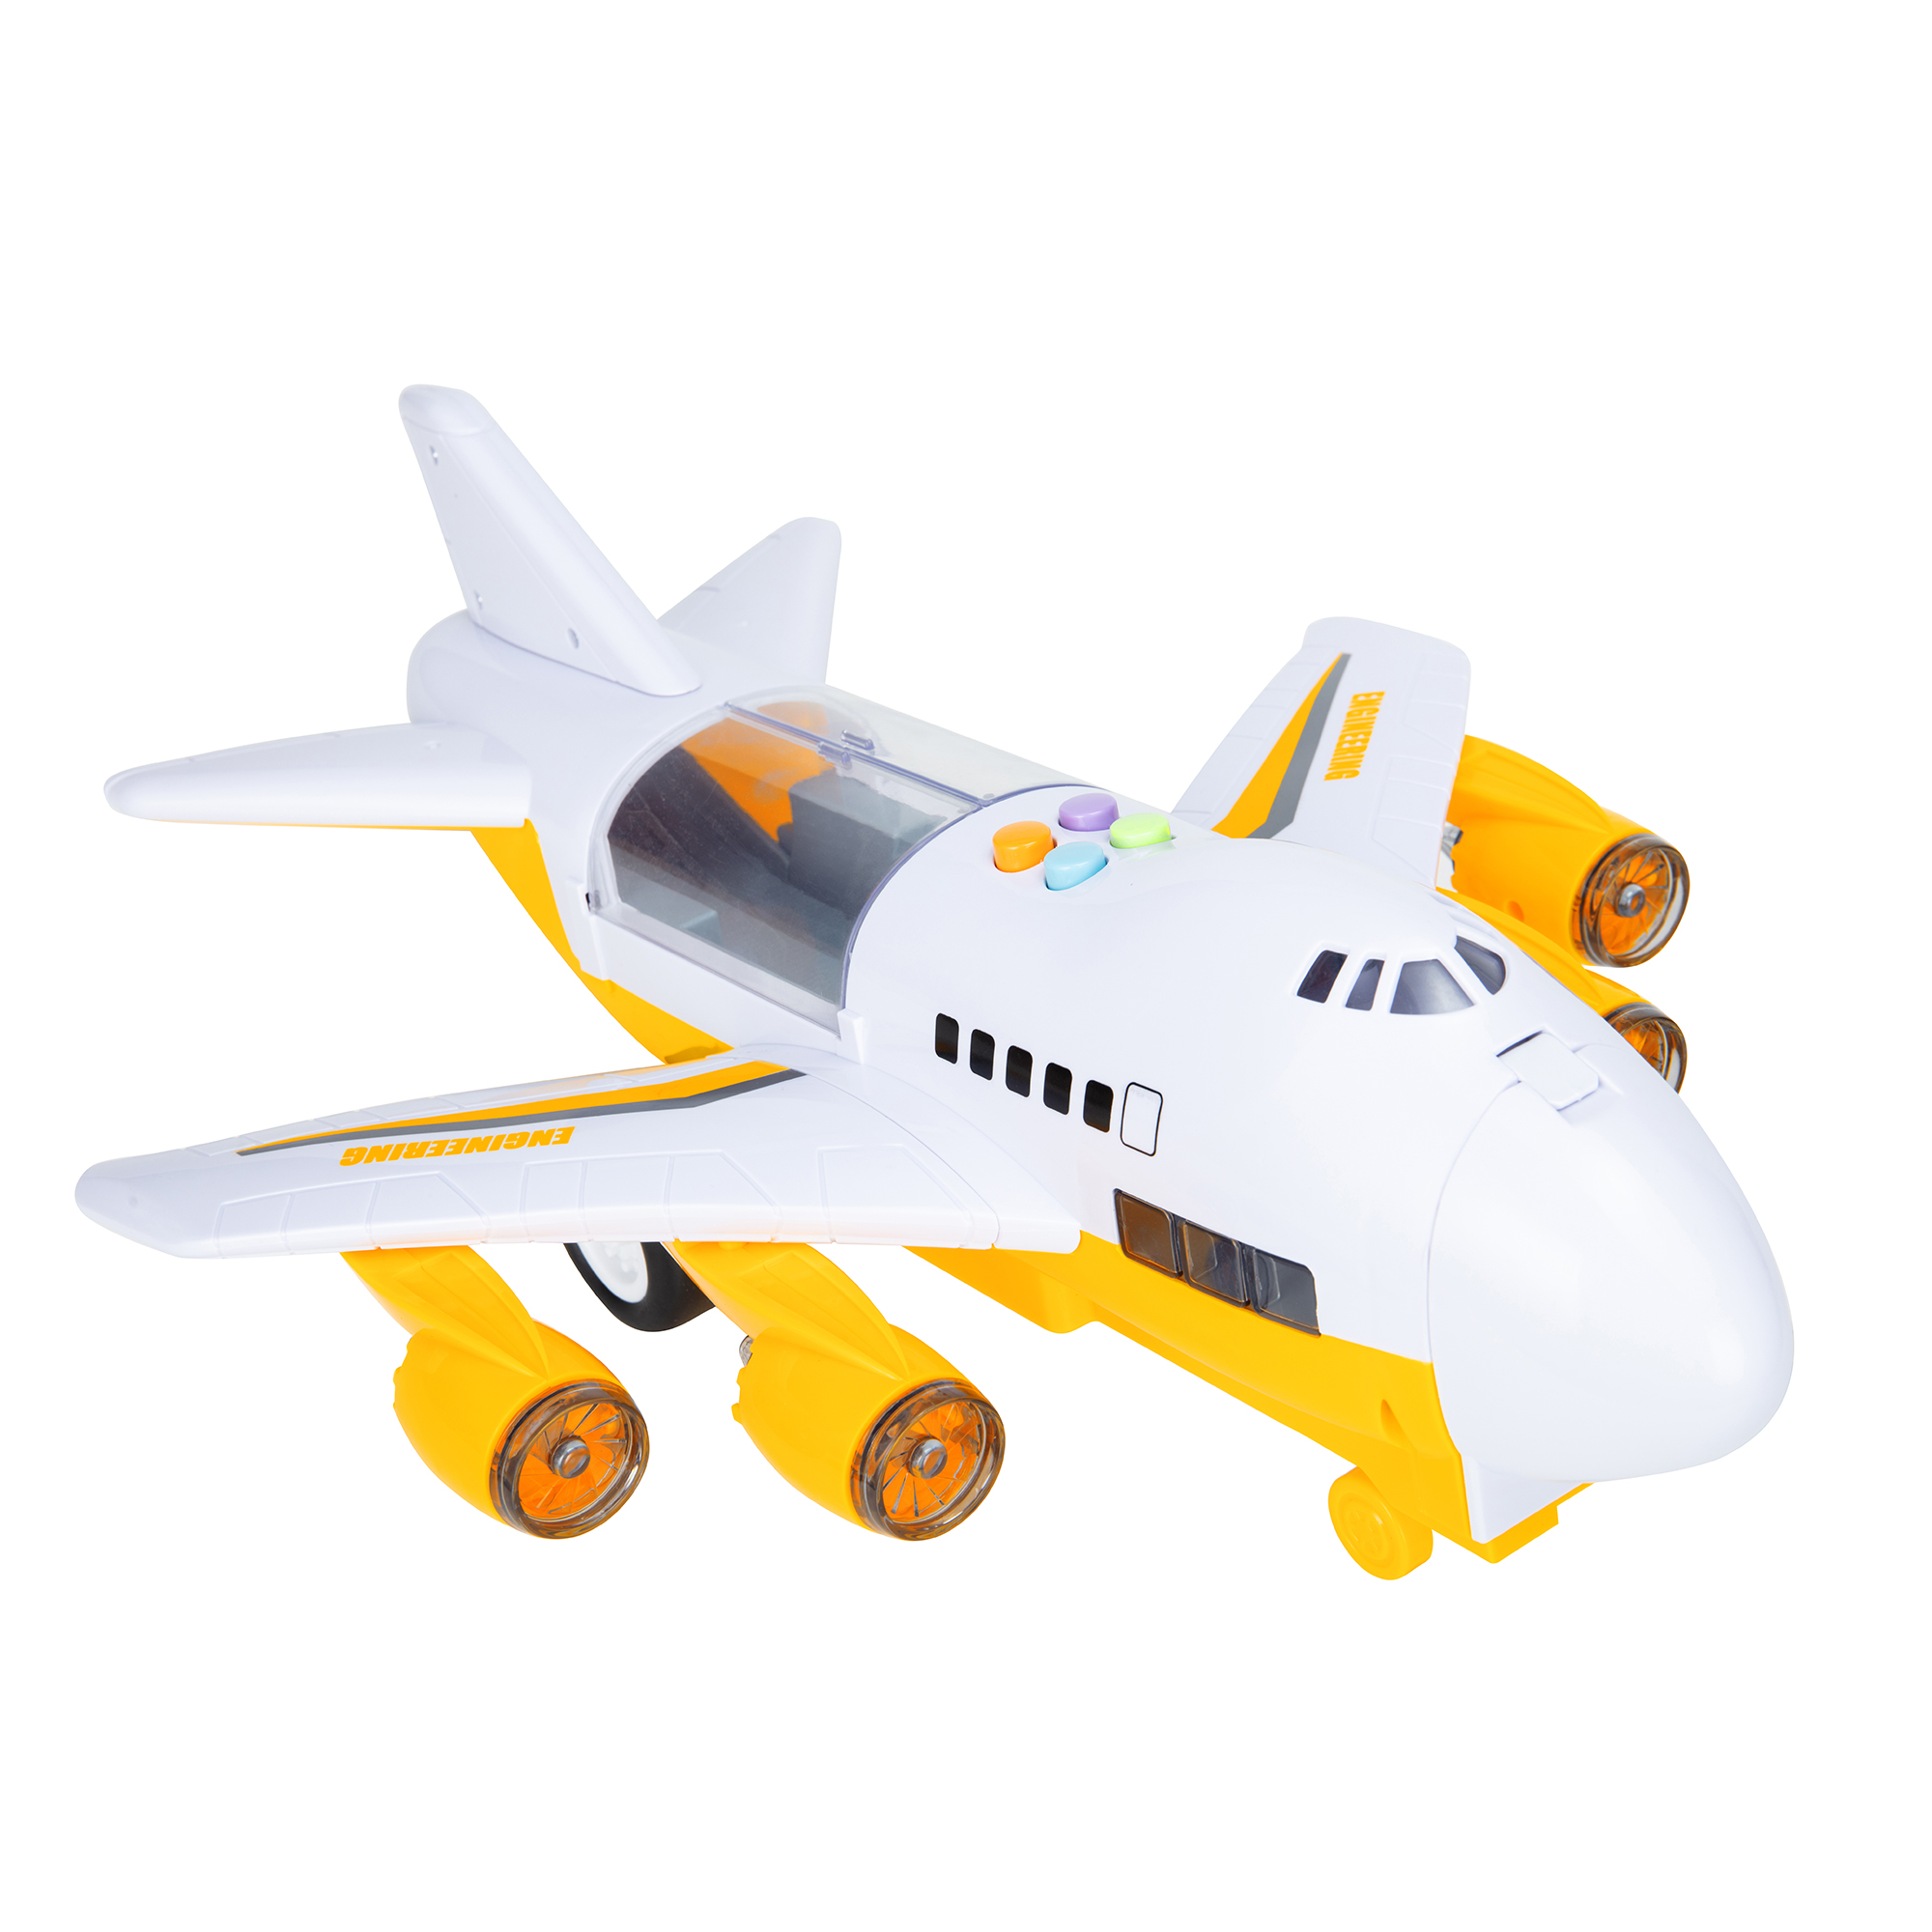 Airplane Toy with Car Toy Helicopter Set Toddler Cargo Transport Airplane Gift Age 3 4 5 6 8 Years Old 6 Mini Vehicles 1 Large Plane 1 Large Play Mat 11 Road Signs - image 3 of 8